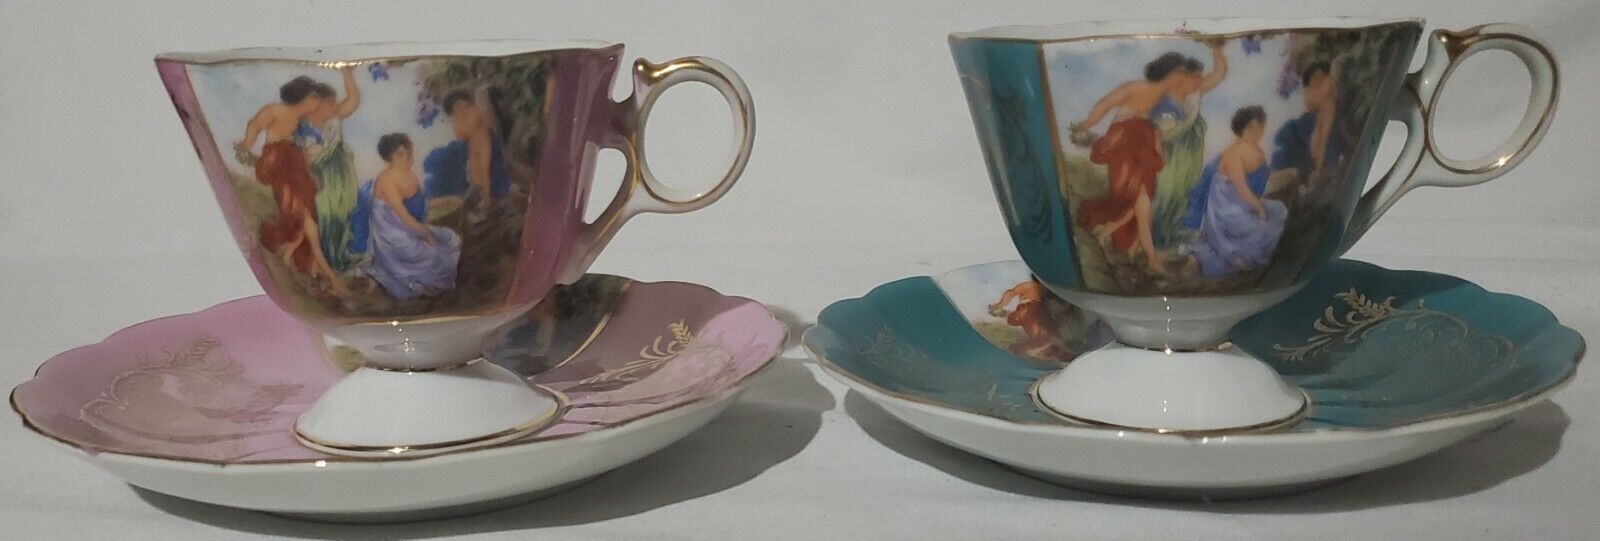 Vintage LM Royal Halsey Teacups And Saucers 2 Of Each Cupid And 3 Fates